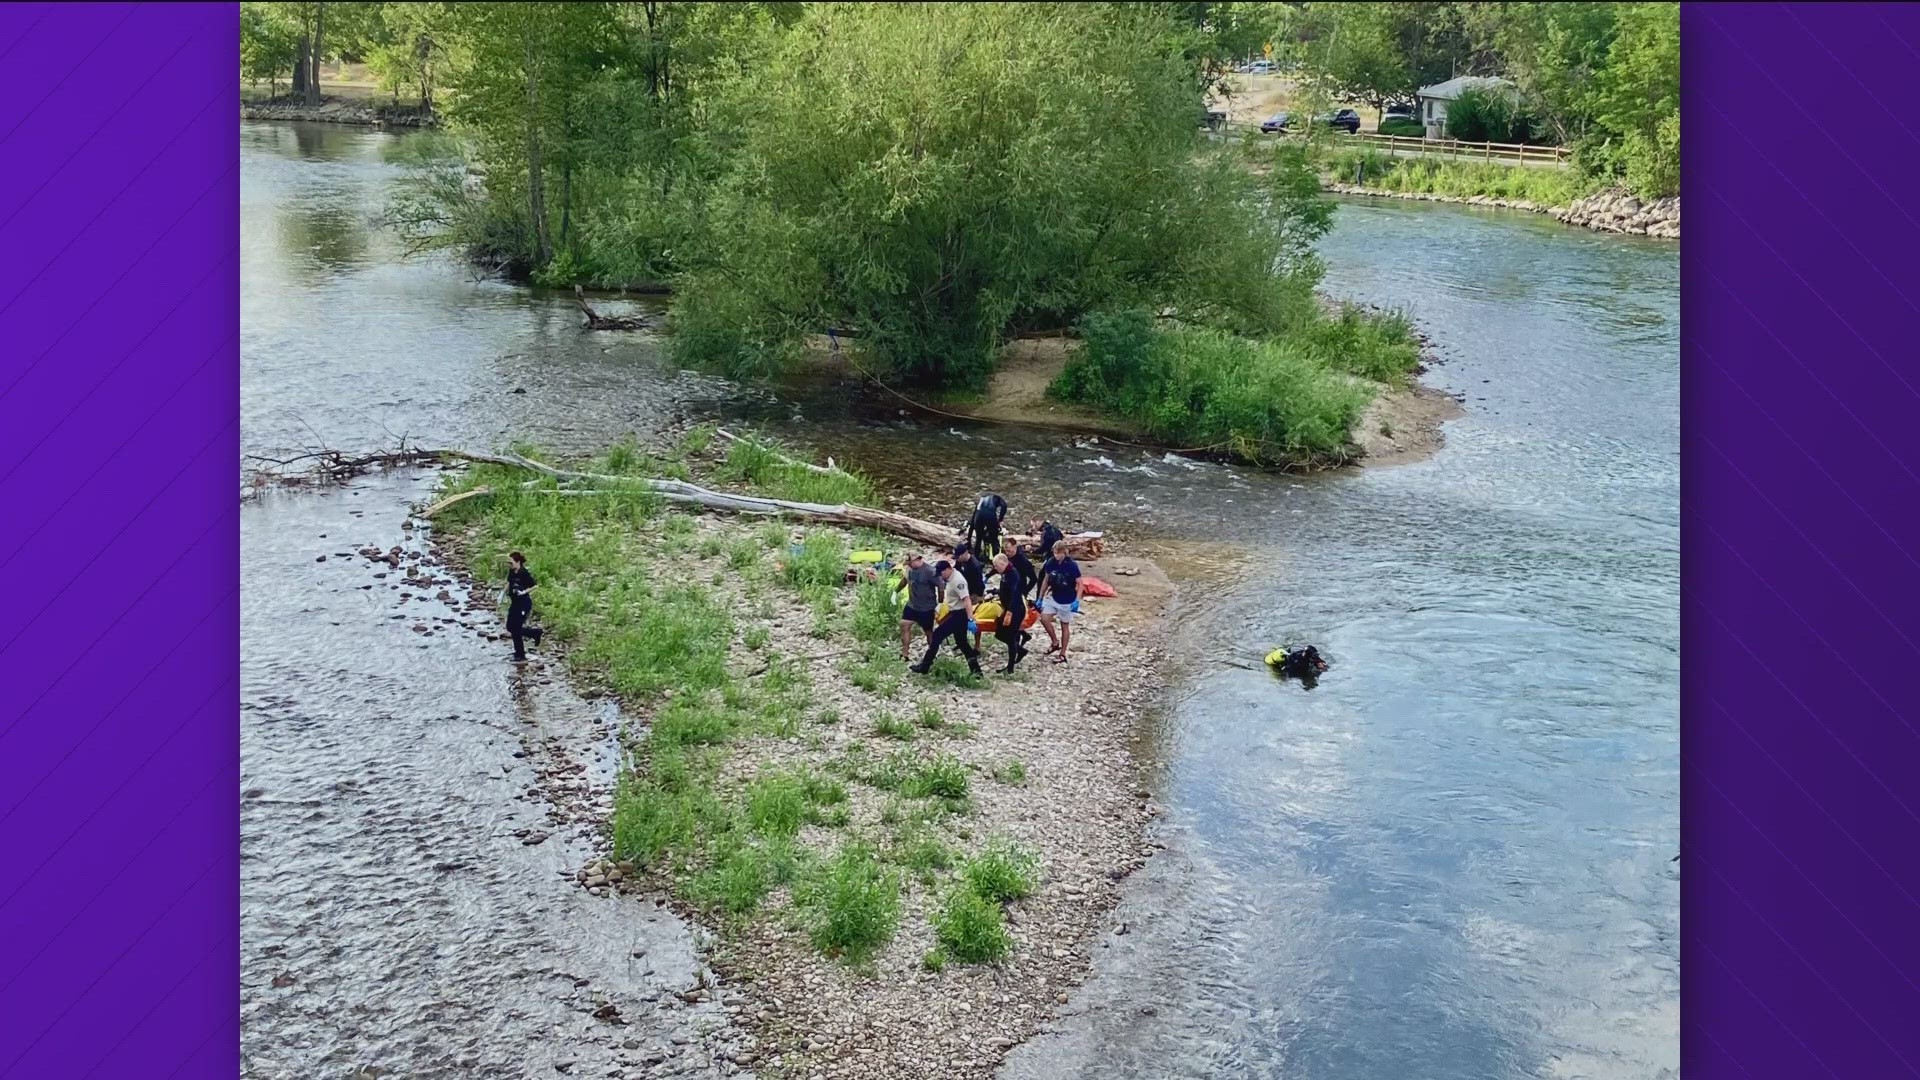 The man was reported missing in 2017. Boise Police said he died by suicide before falling in the river.